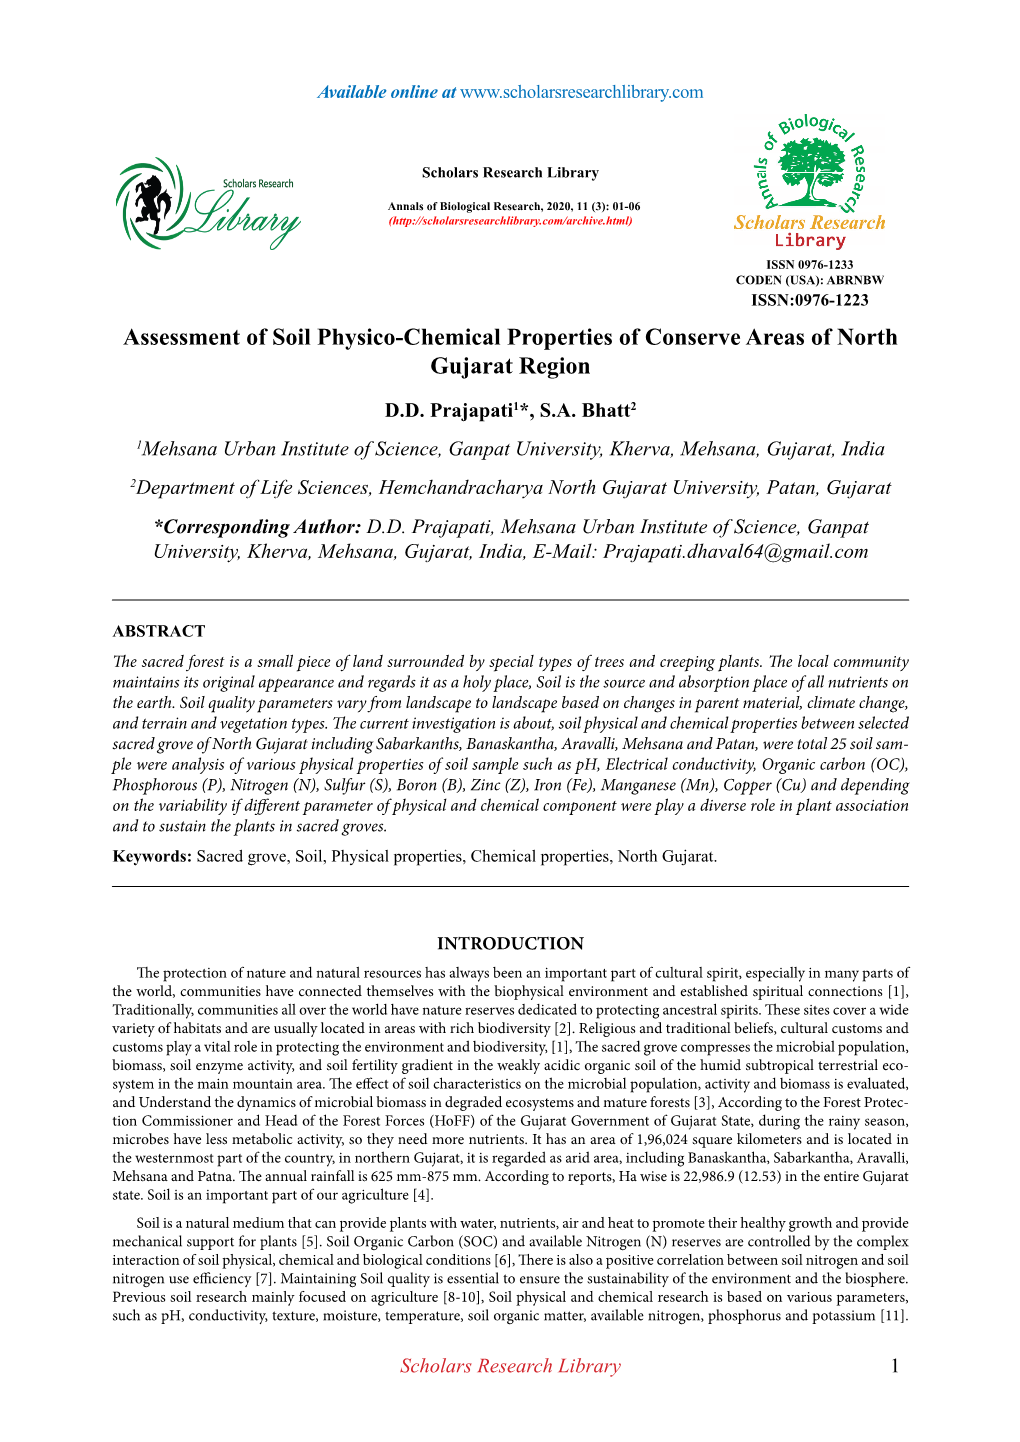 Assessment of Soil Physico-Chemical Properties of Conserve Areas of North Gujarat Region